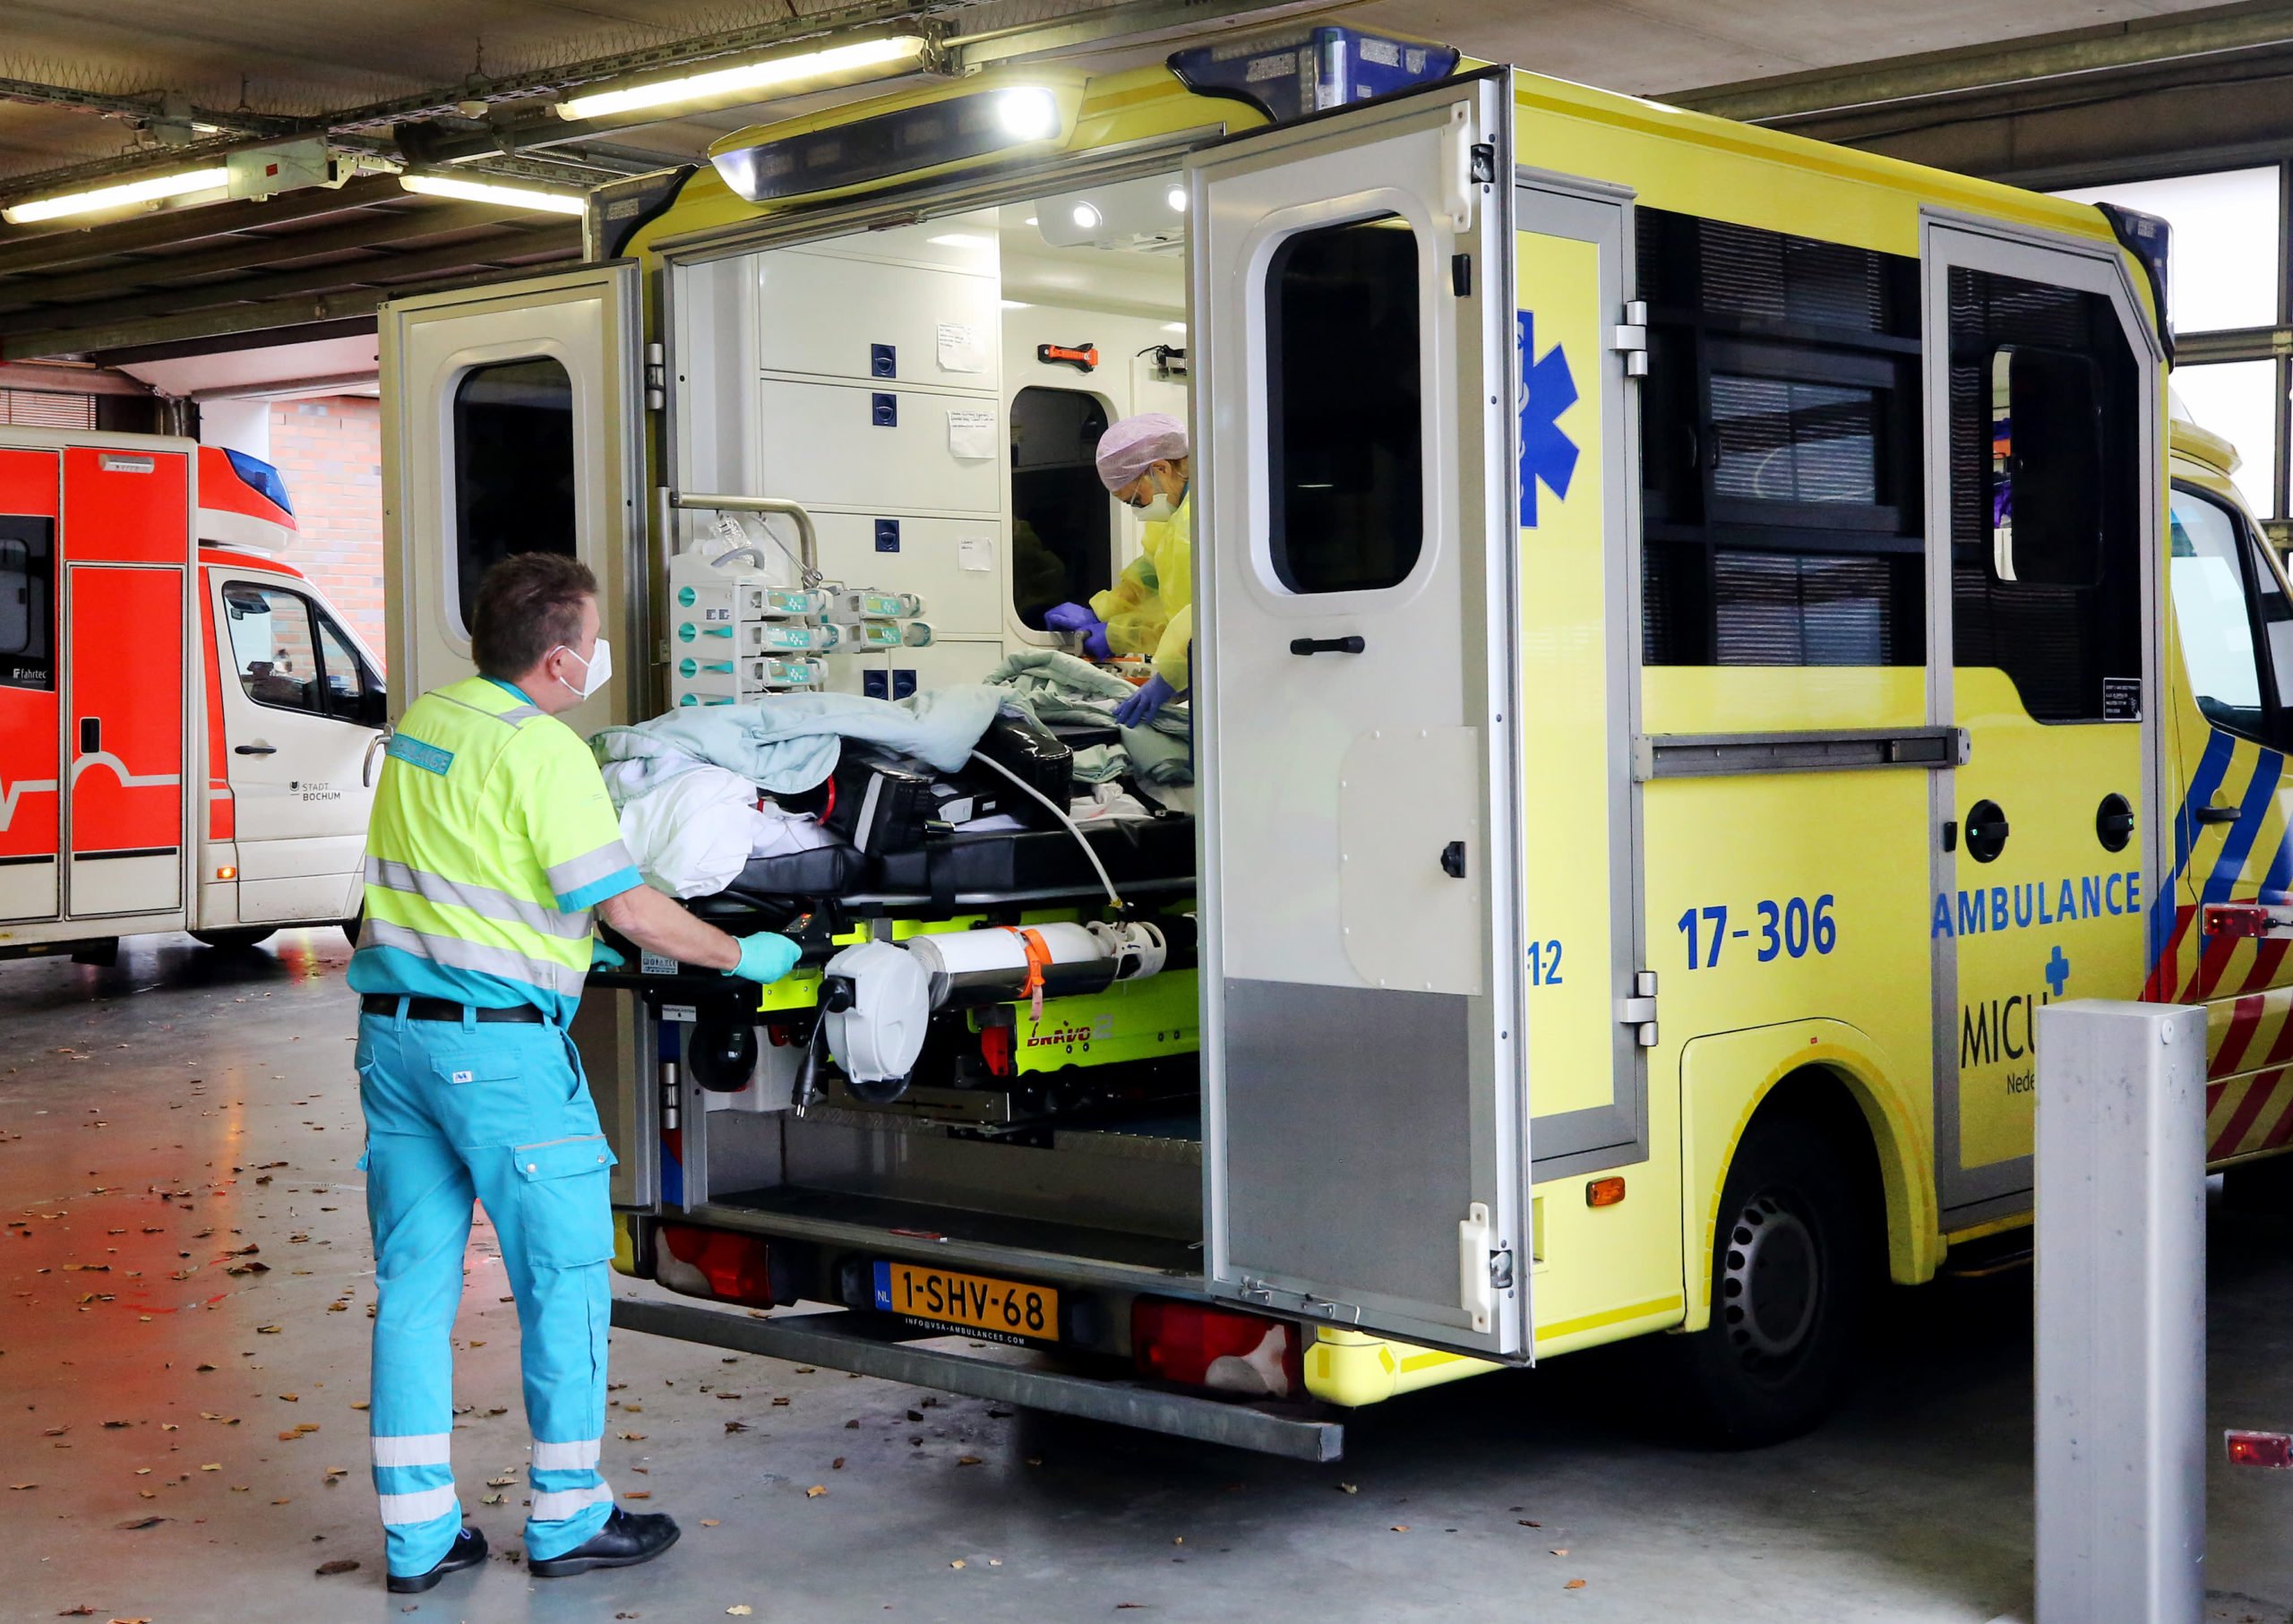 Dutch Covid patients transferred to Germany as hospitals struggle